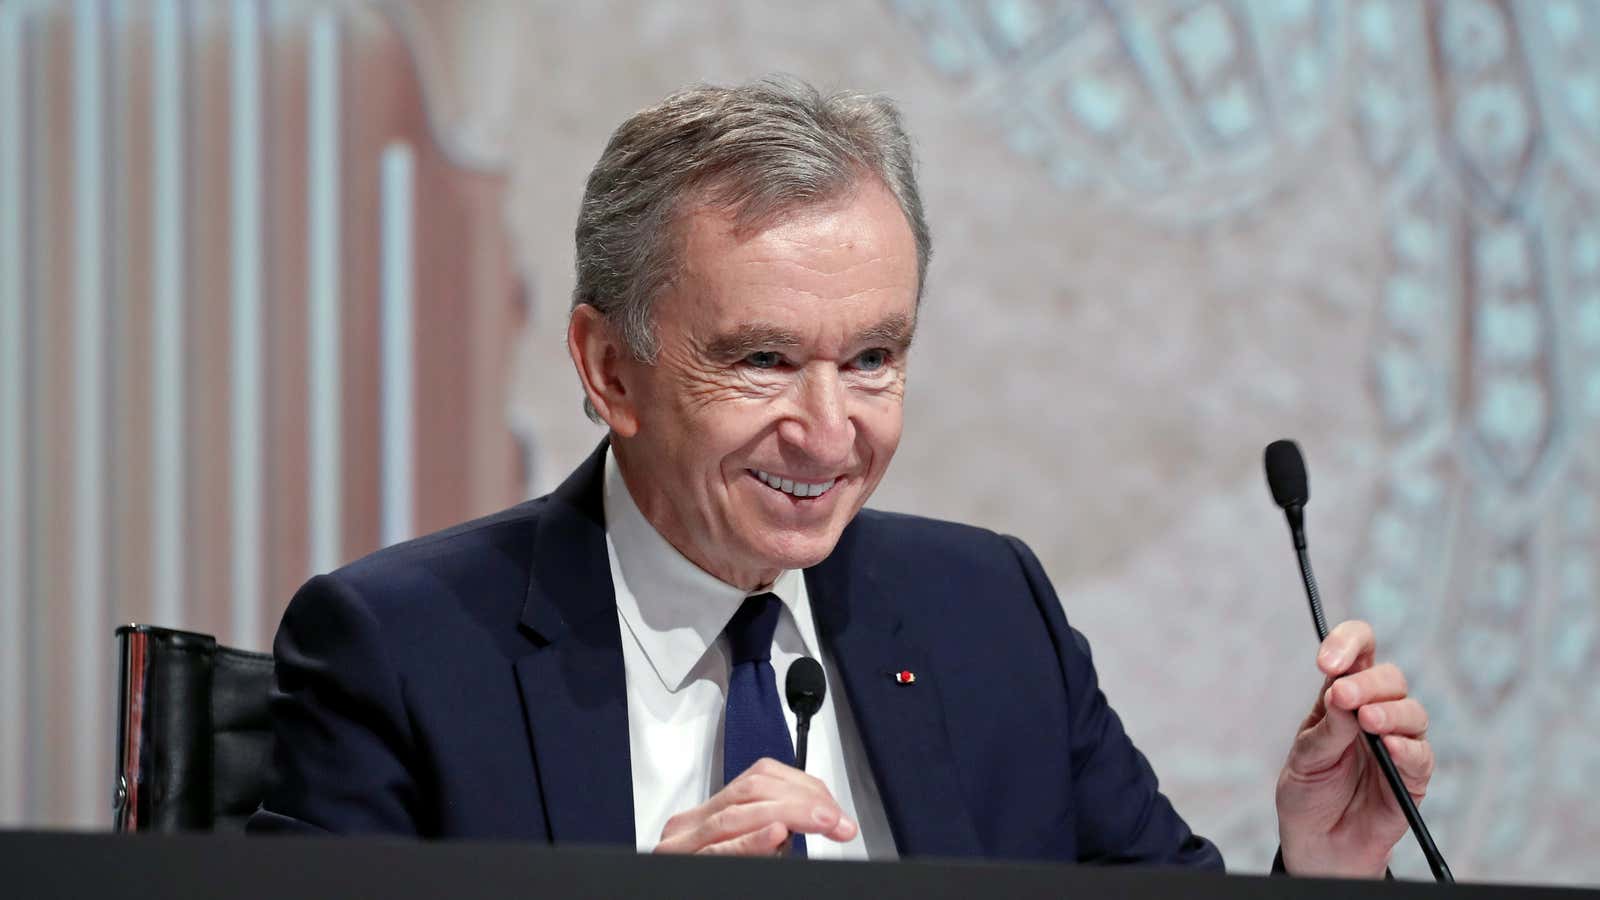 Bernard Arnault, a man with billions of reasons to smile.